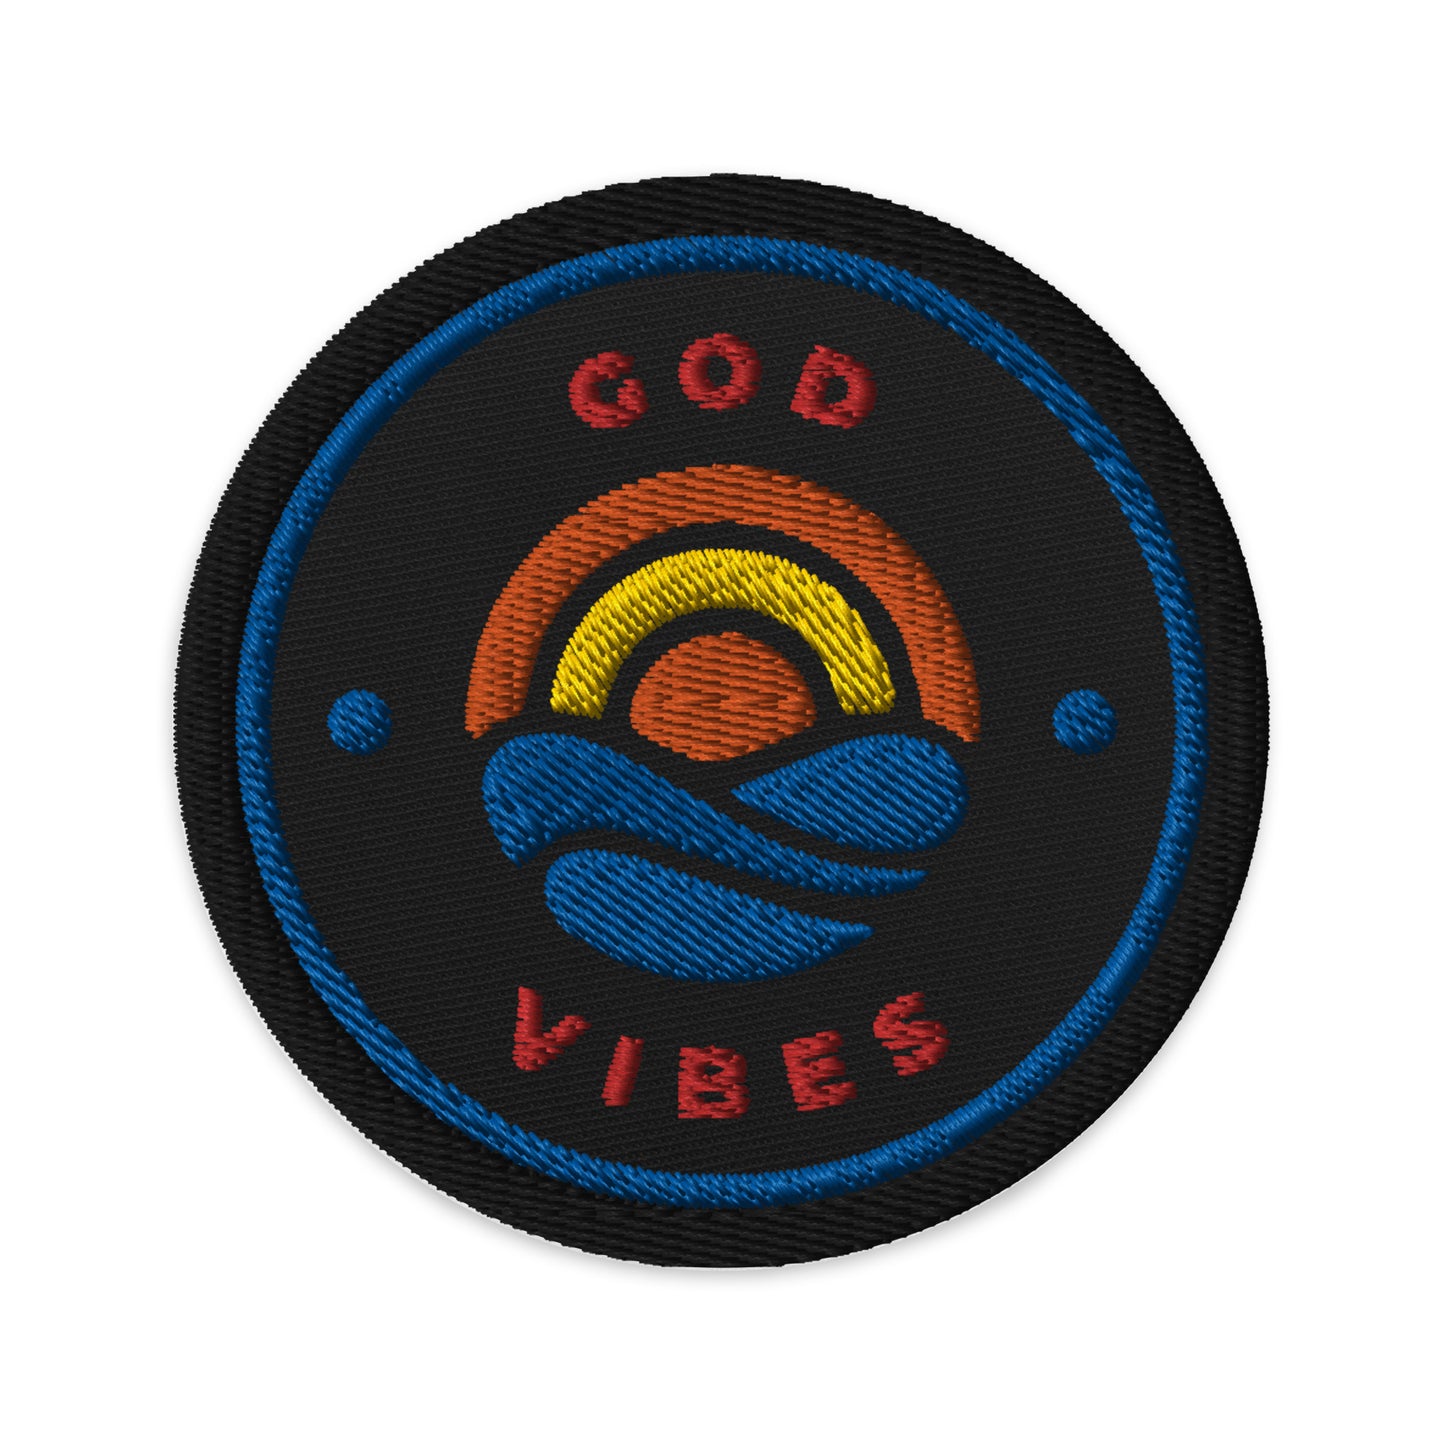 GOD VIBES Embroidered patches